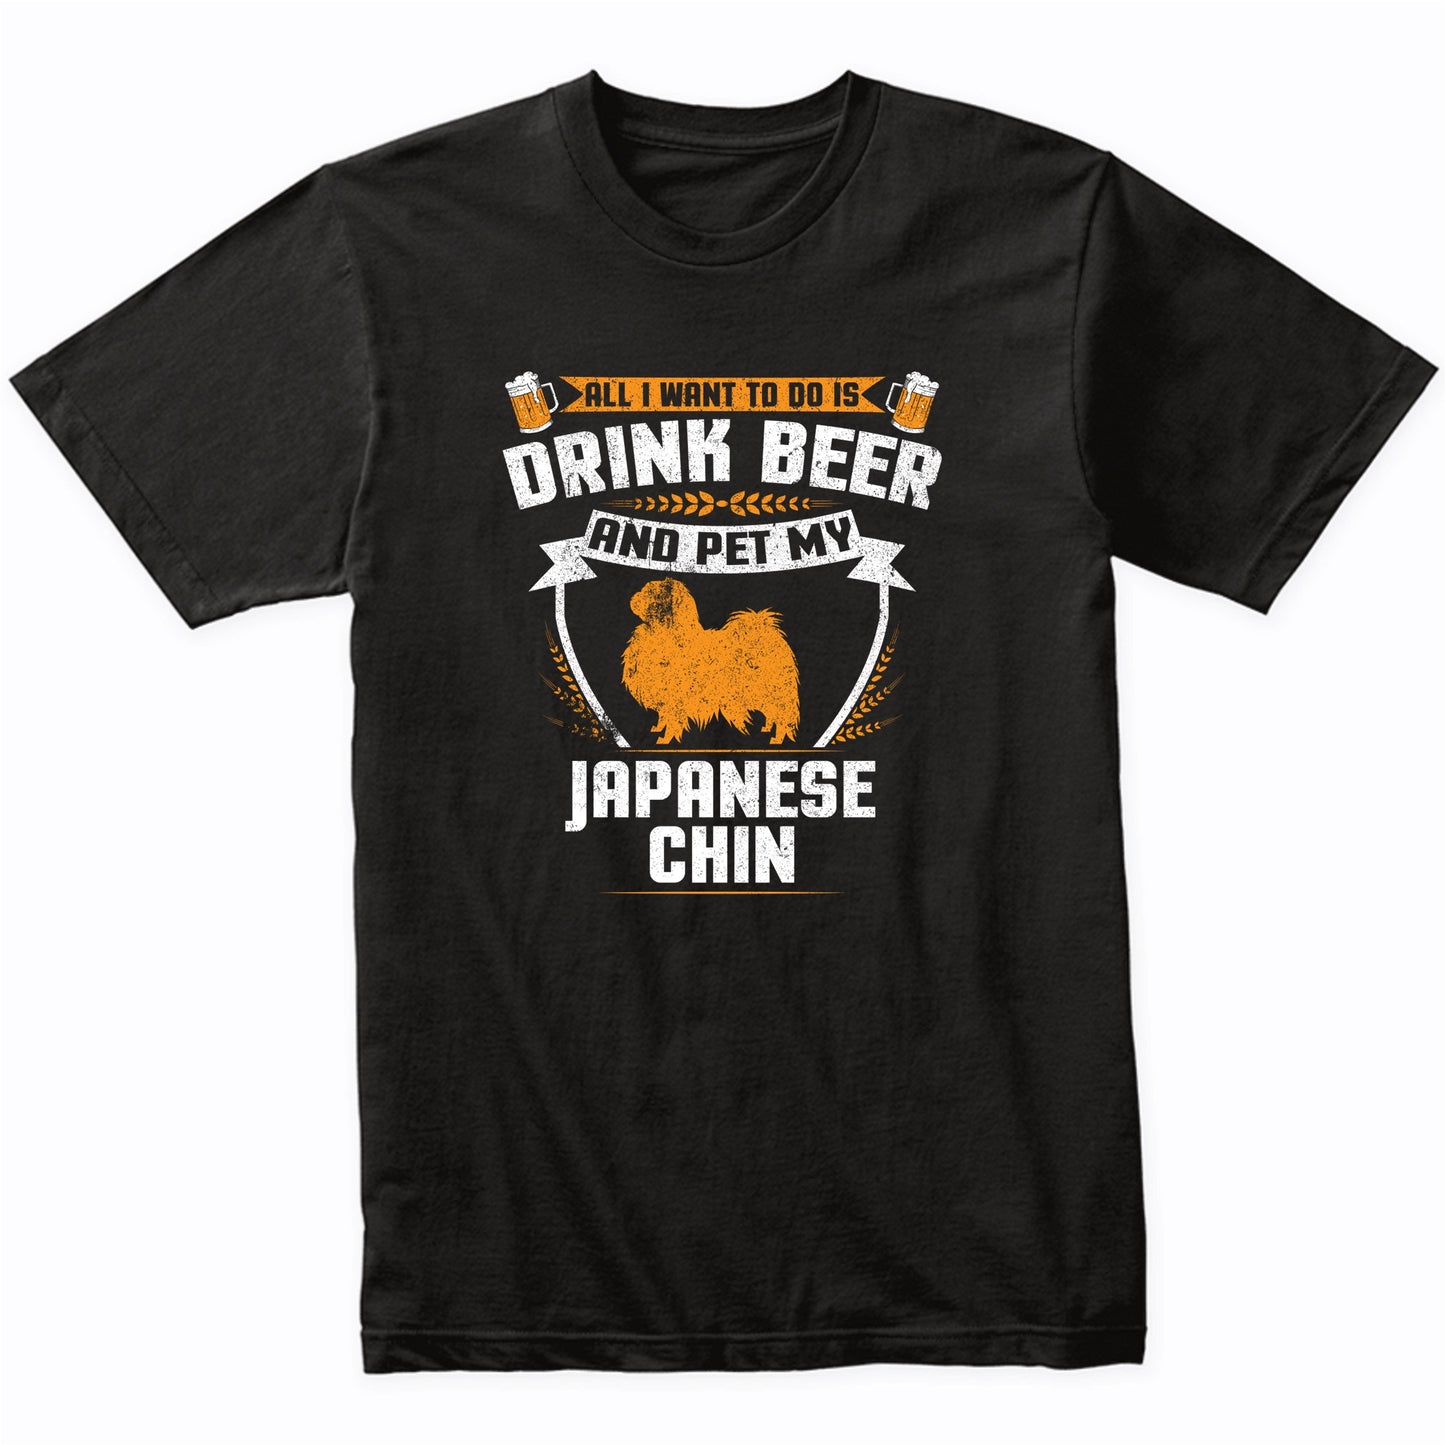 All I Want To Do Is Drink Beer And Pet My Japanese Chin Funny Dog Owner Shirt